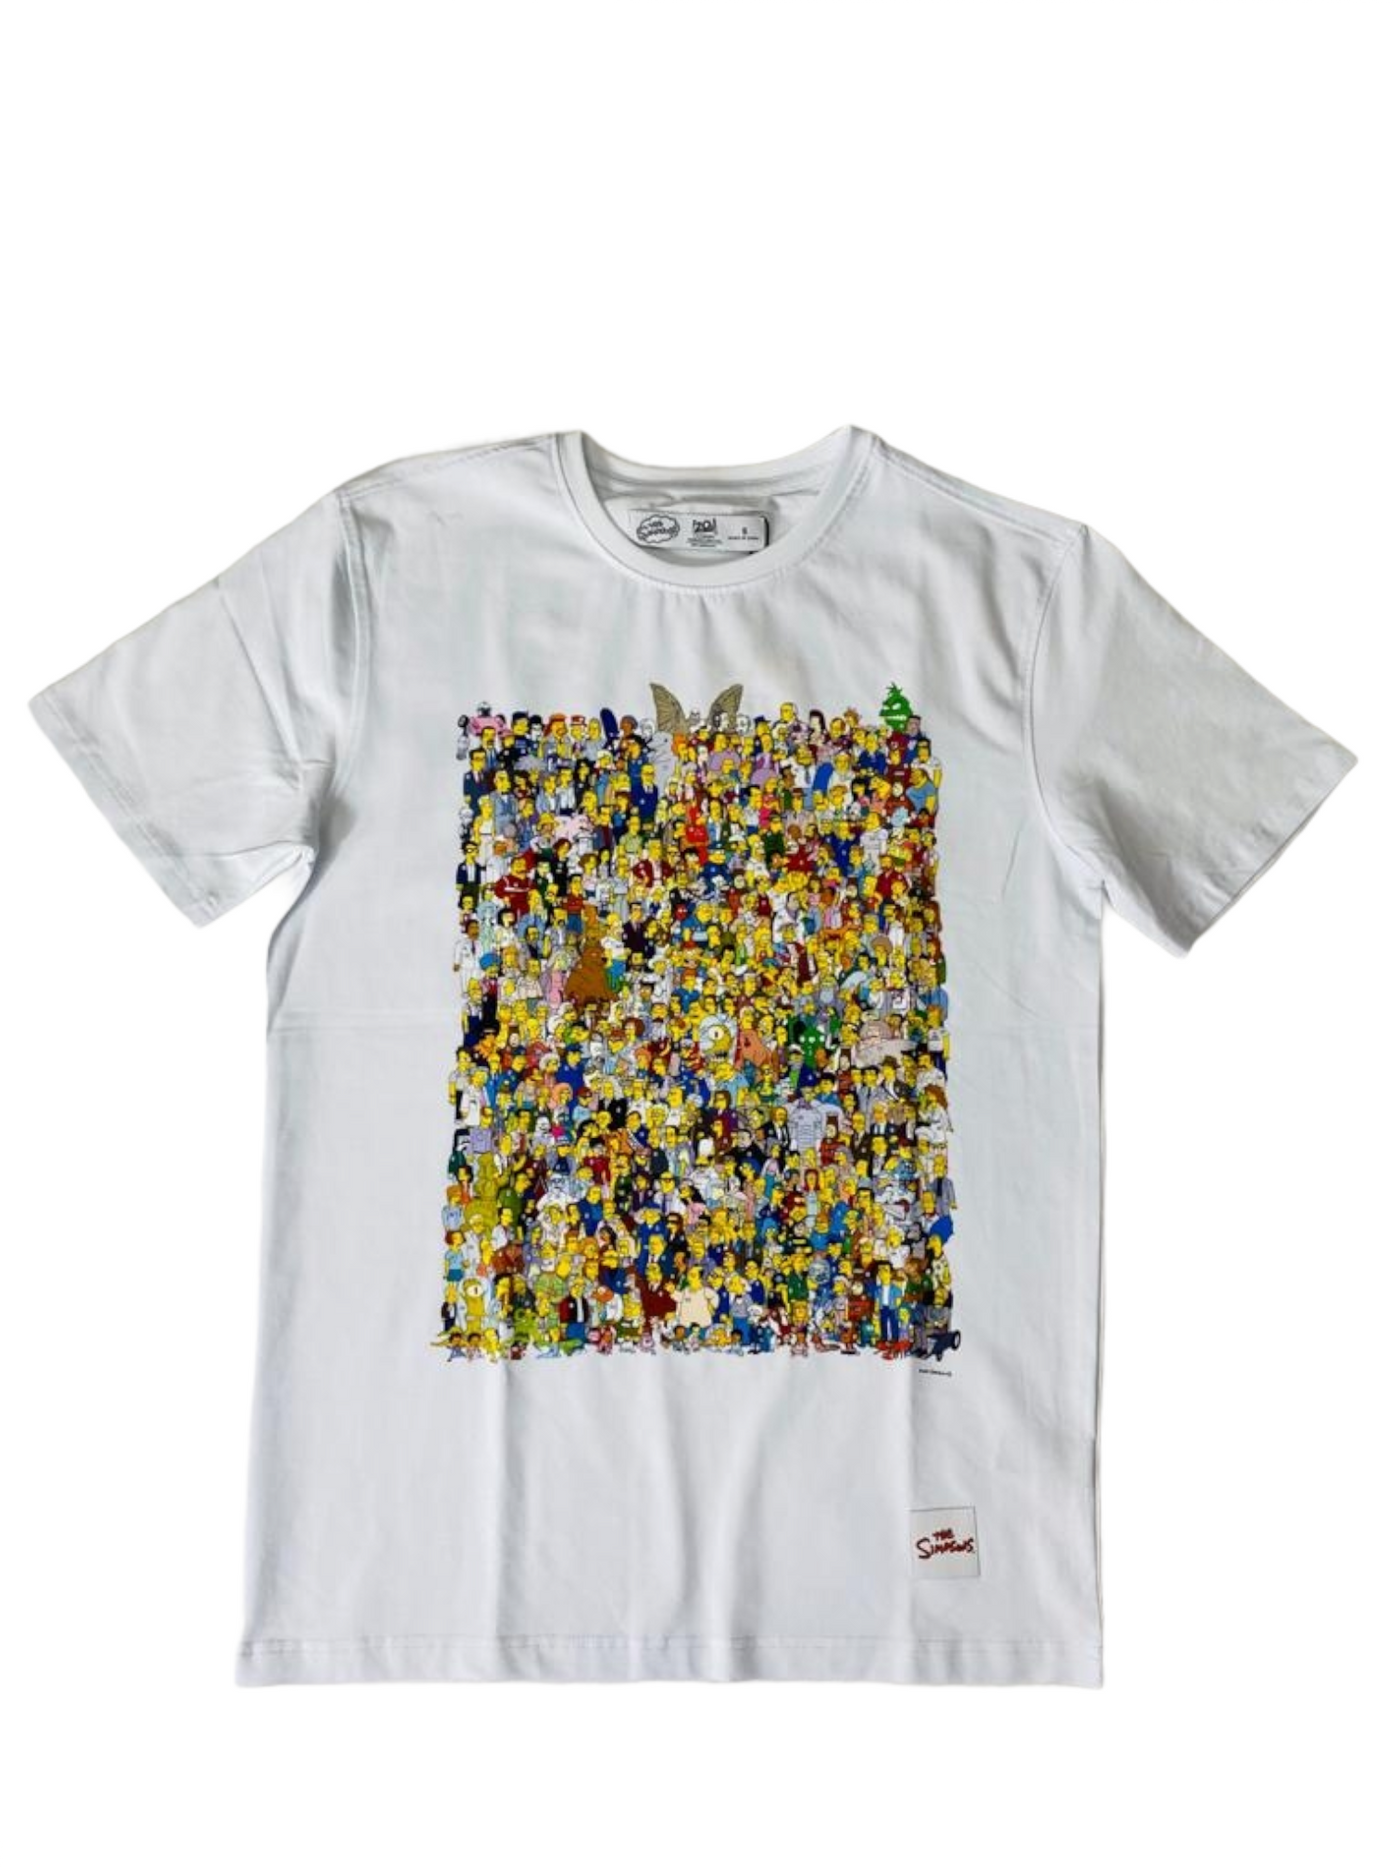 The Simpsons Collage Tee White